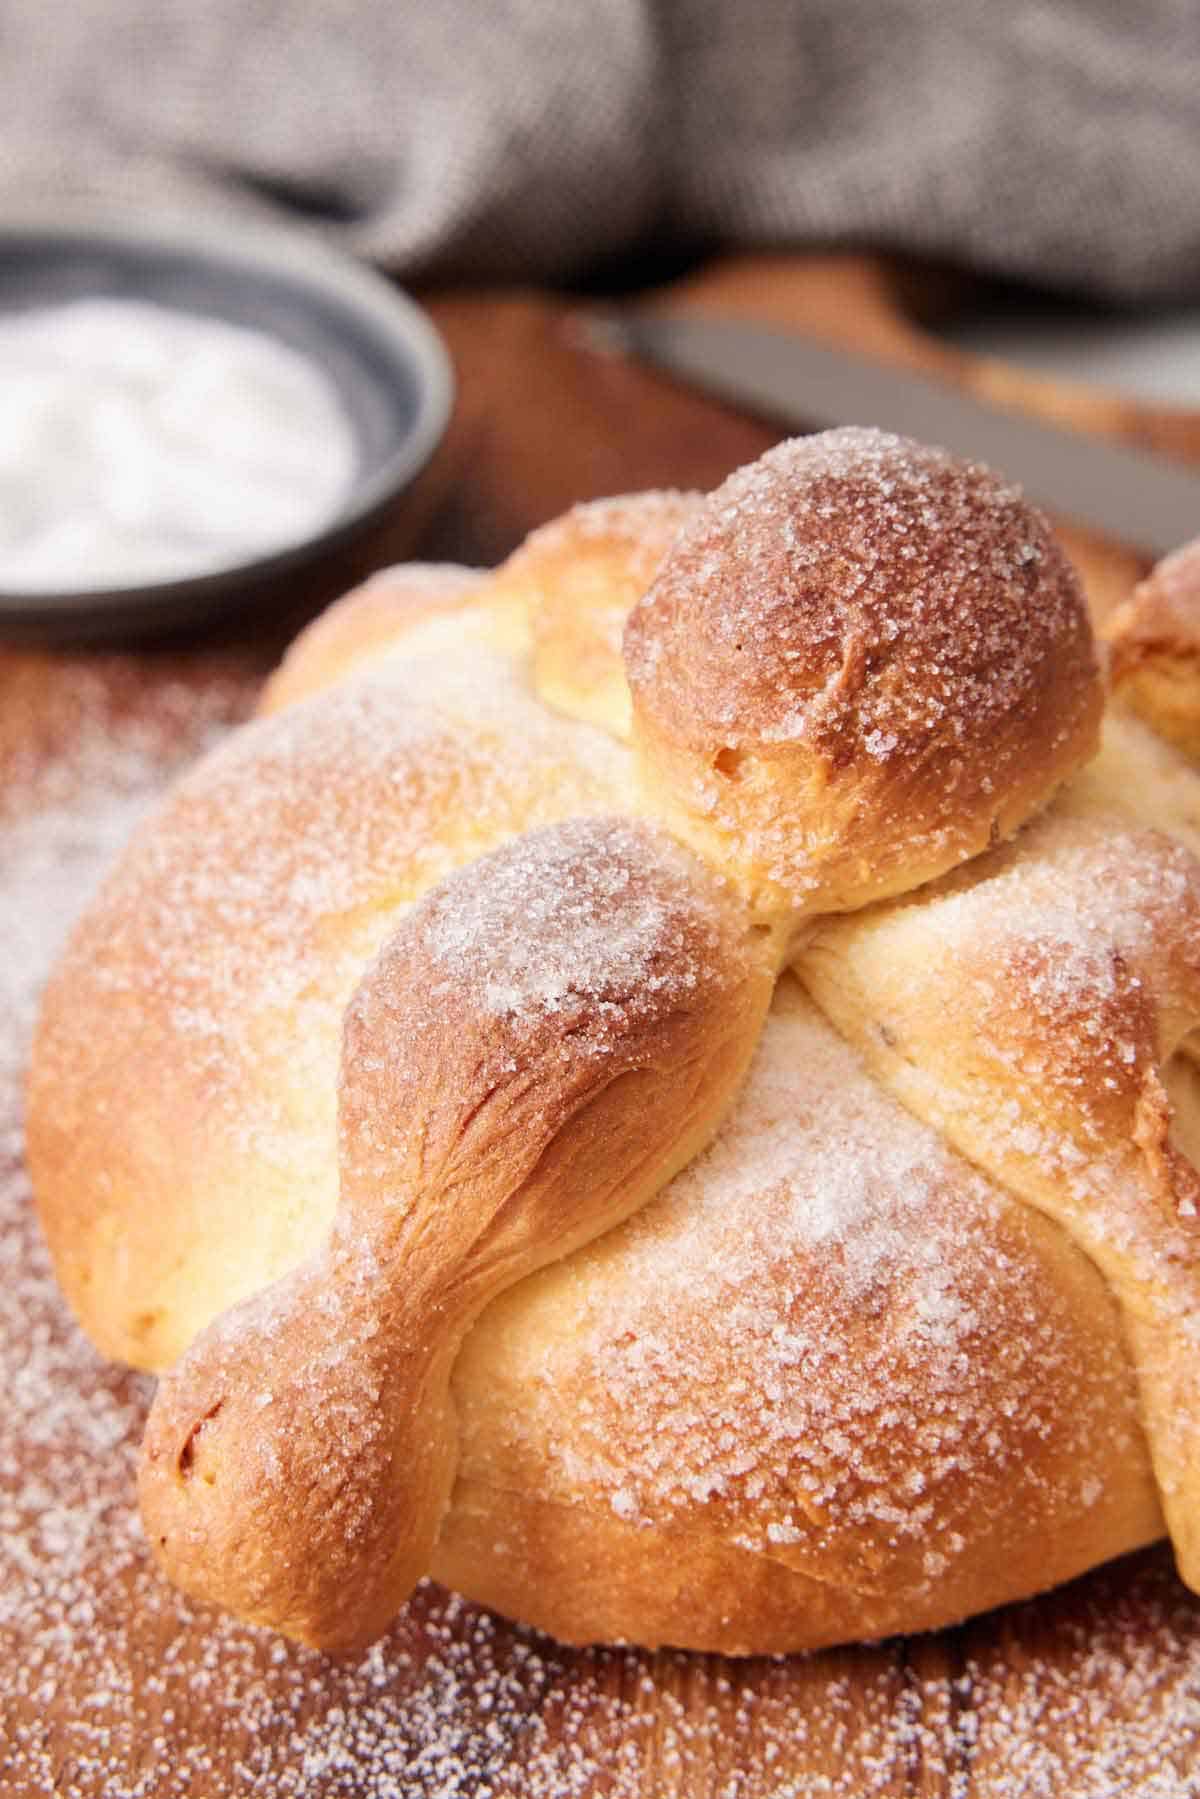 A close up view of Pan de Muerto topped with a sprinkling of sugar.